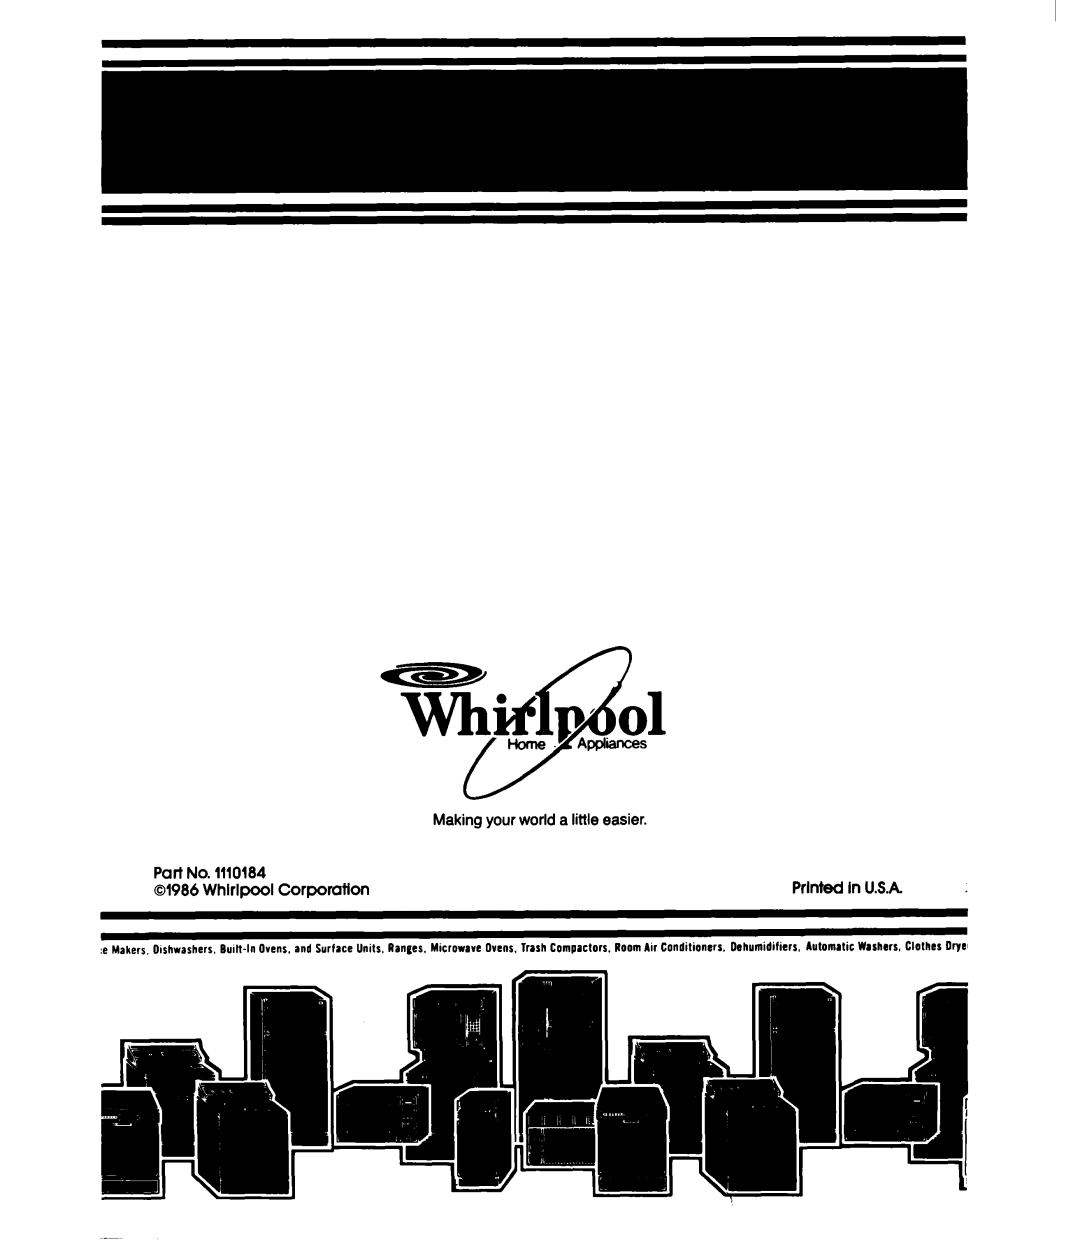 Whirlpool ED22EM manual Making your world a little easier, Whlrlpool Corporation, Prlnted In U.S.A 